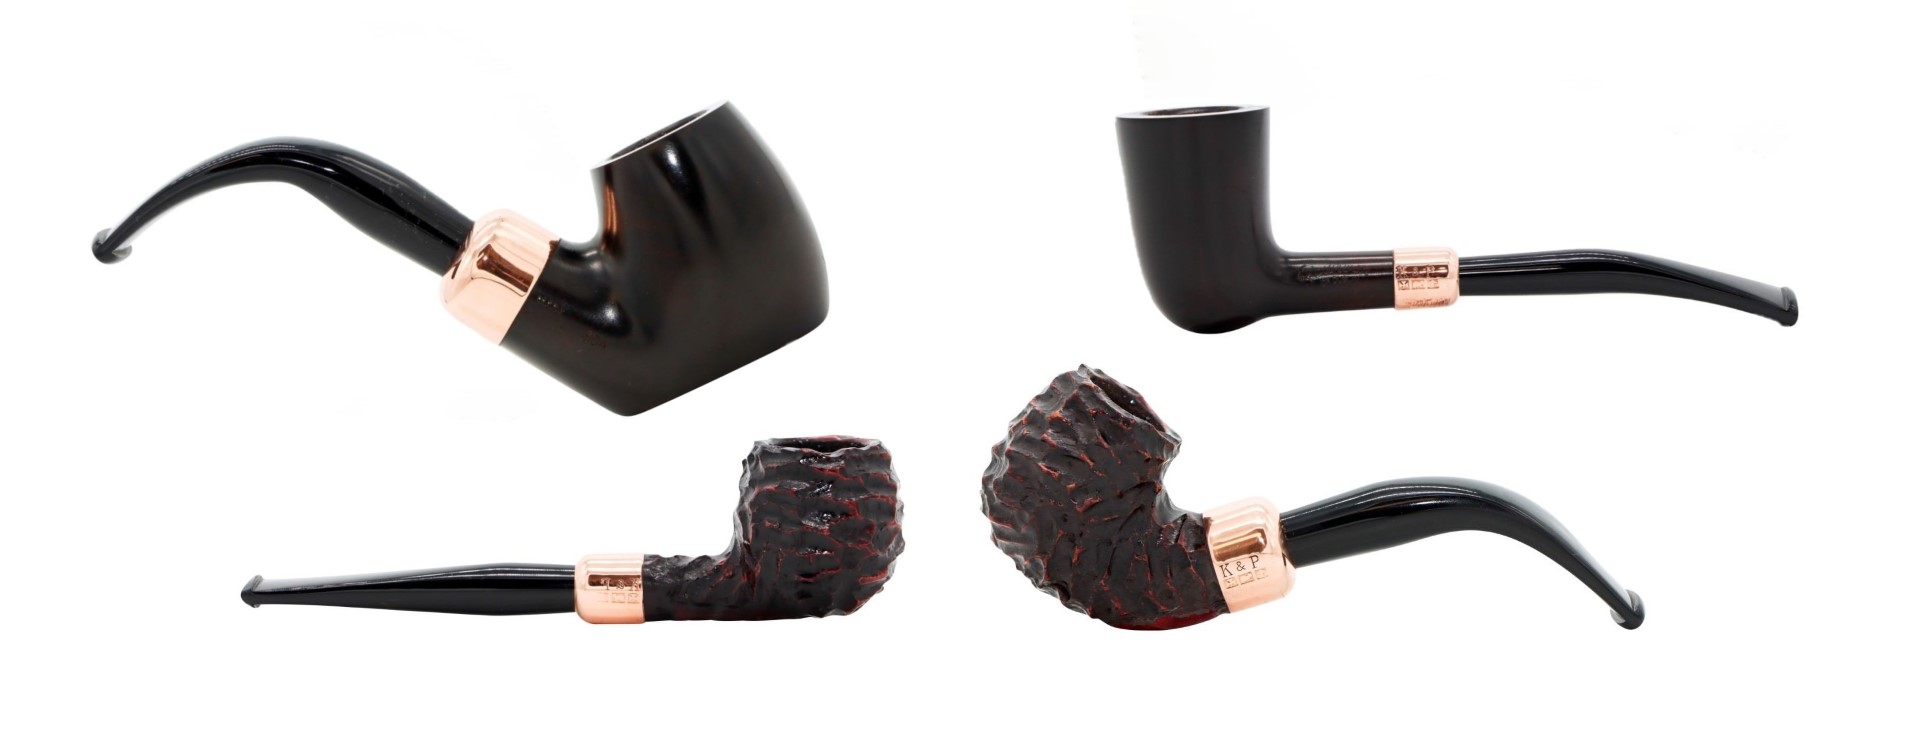 Peterson Christmas Tobacco Pipes